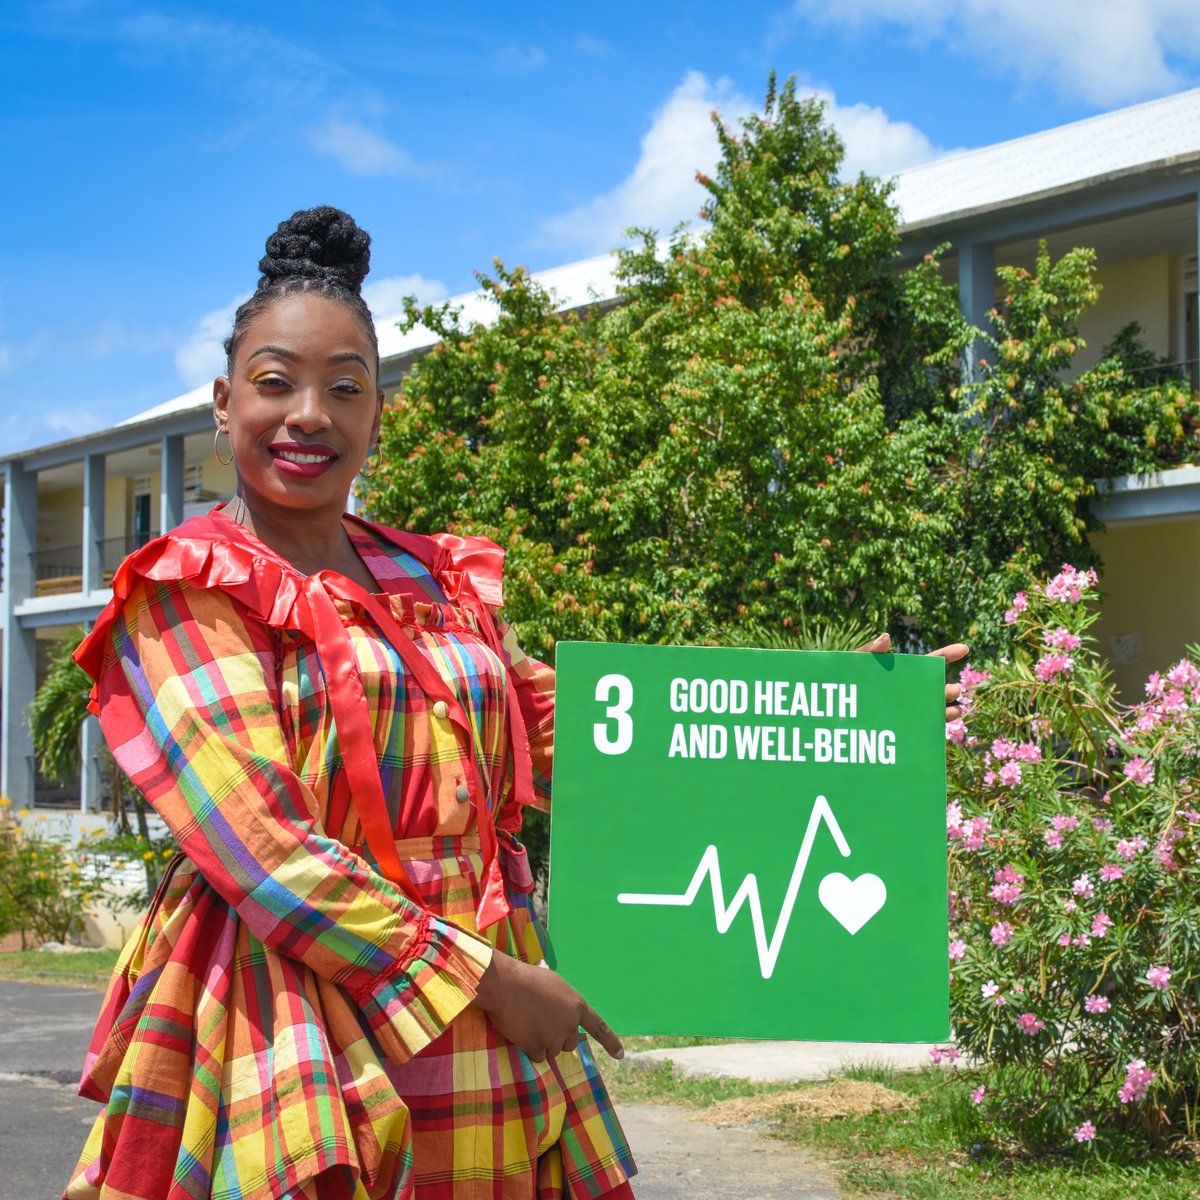 Let's prioritize health and well-being for everyone, everywhere! 🌍 #SDG3 aims to ensure healthy lives and promote well-being for all at all ages. From improving healthcare access to tackling diseases, together, we can build healthier, happier communities. #HealthForAll #SDGs